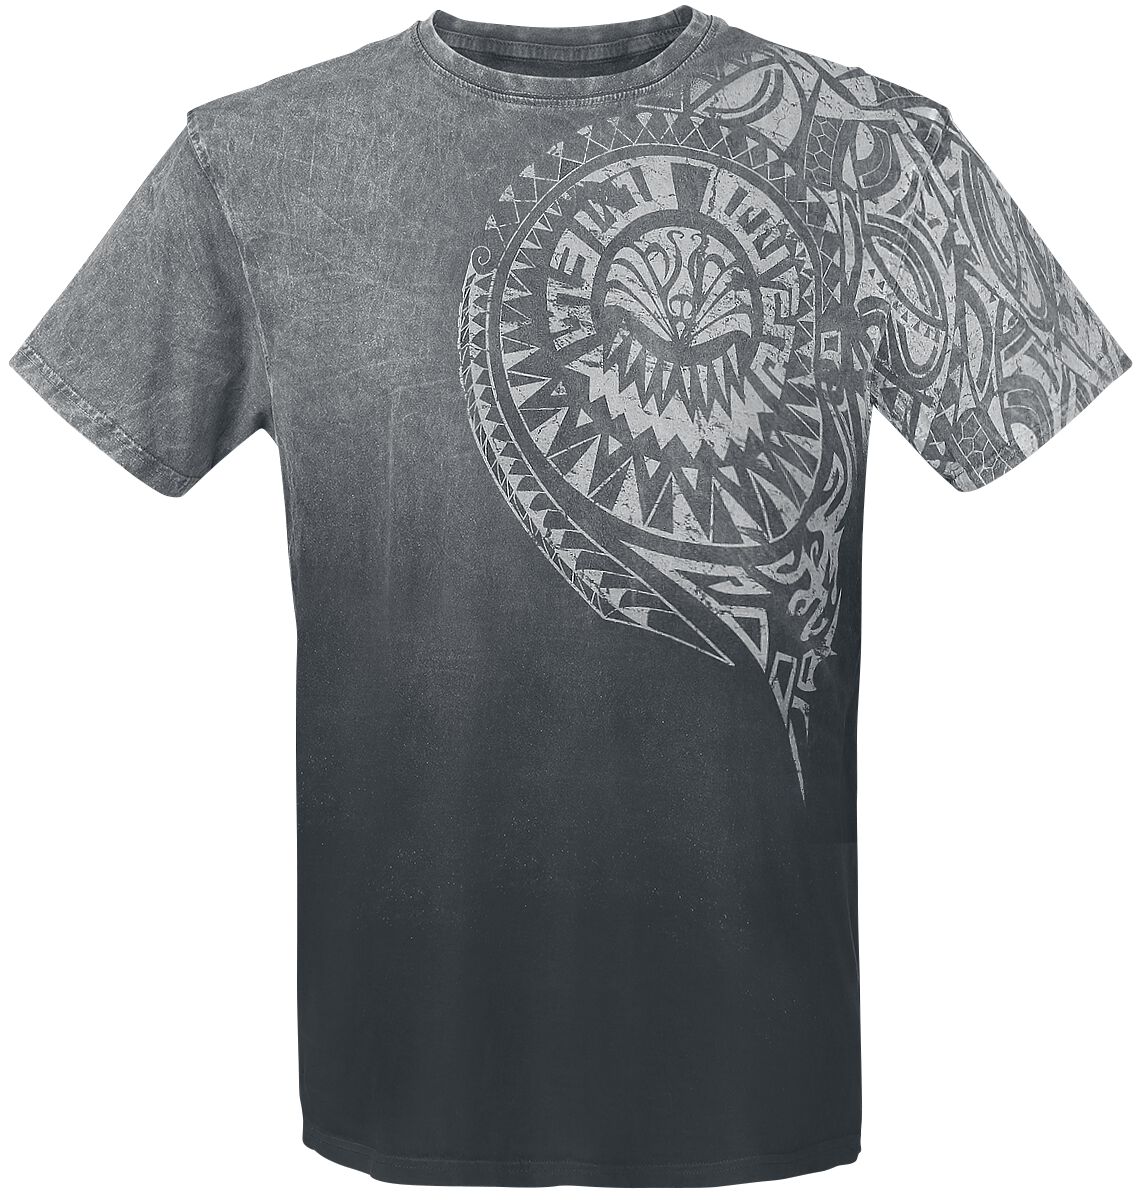 Outer Vision Burned Tattoo T-Shirt grau in XL